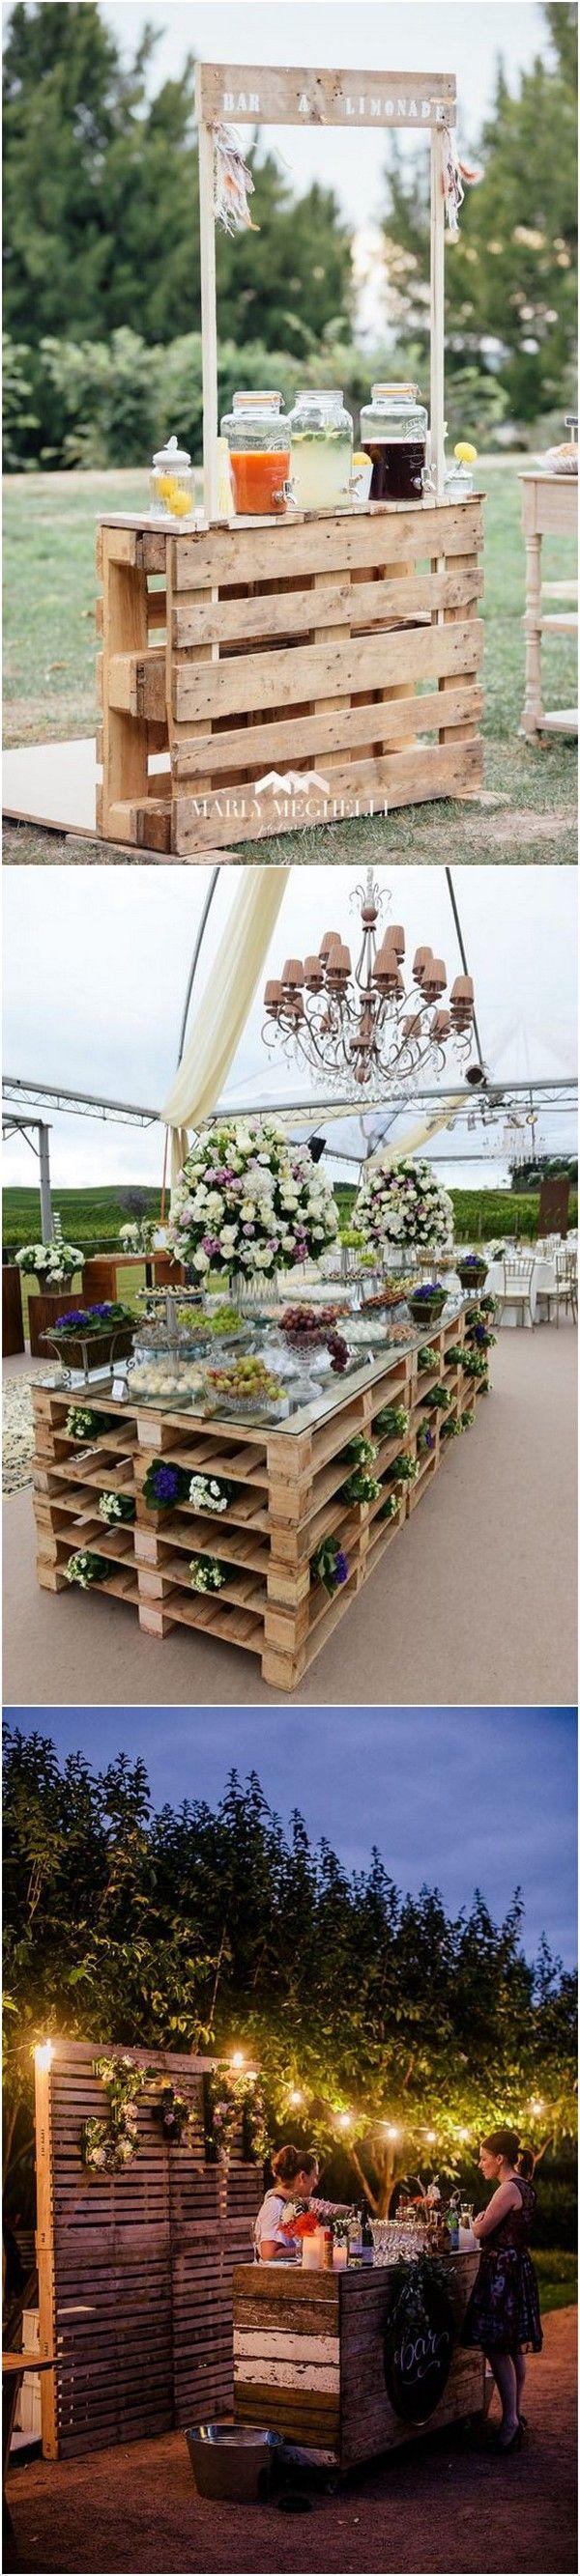 Wedding - 24 Ideas To Use Wood Pallet For Your Country Wedding - Page 2 Of 2